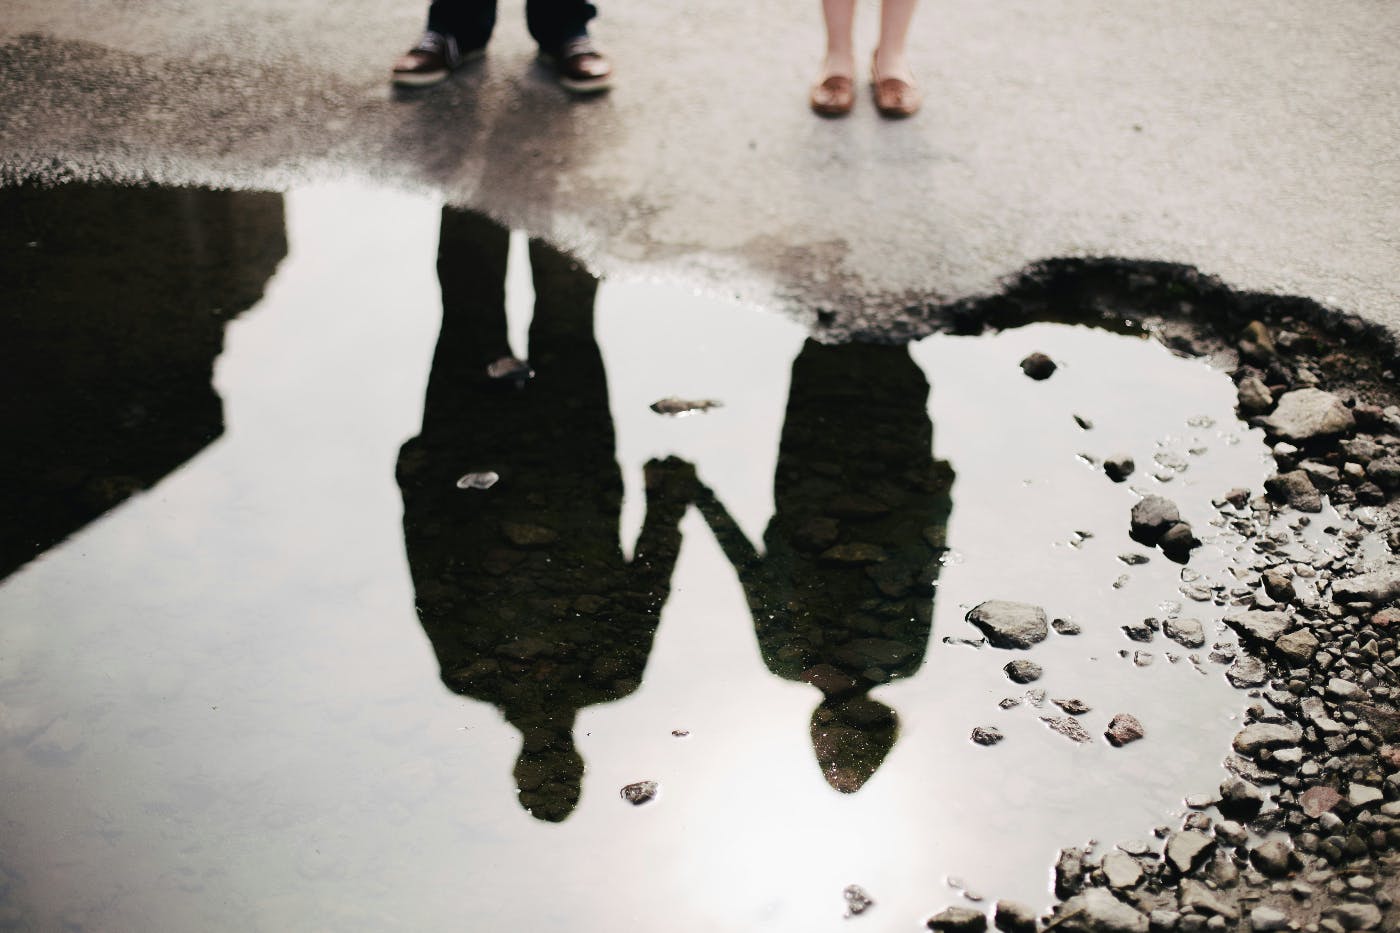 Reflection in a puddle of a couple holding hands